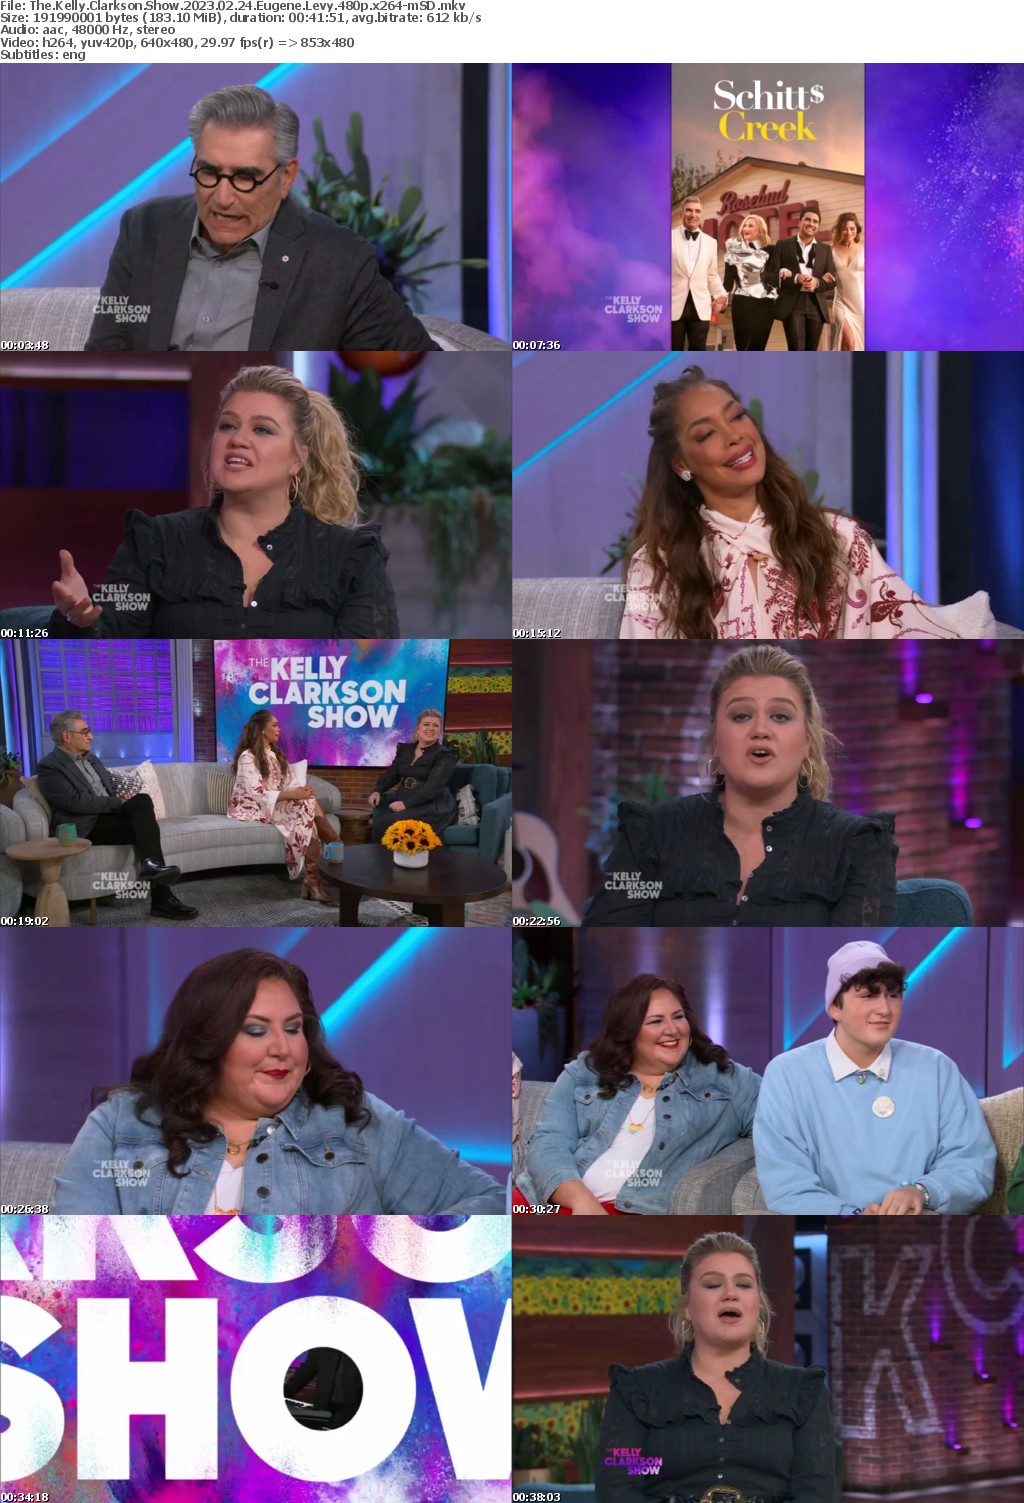 The Kelly Clarkson Show 2023 02 24 Eugene Levy 480p x264-mSD